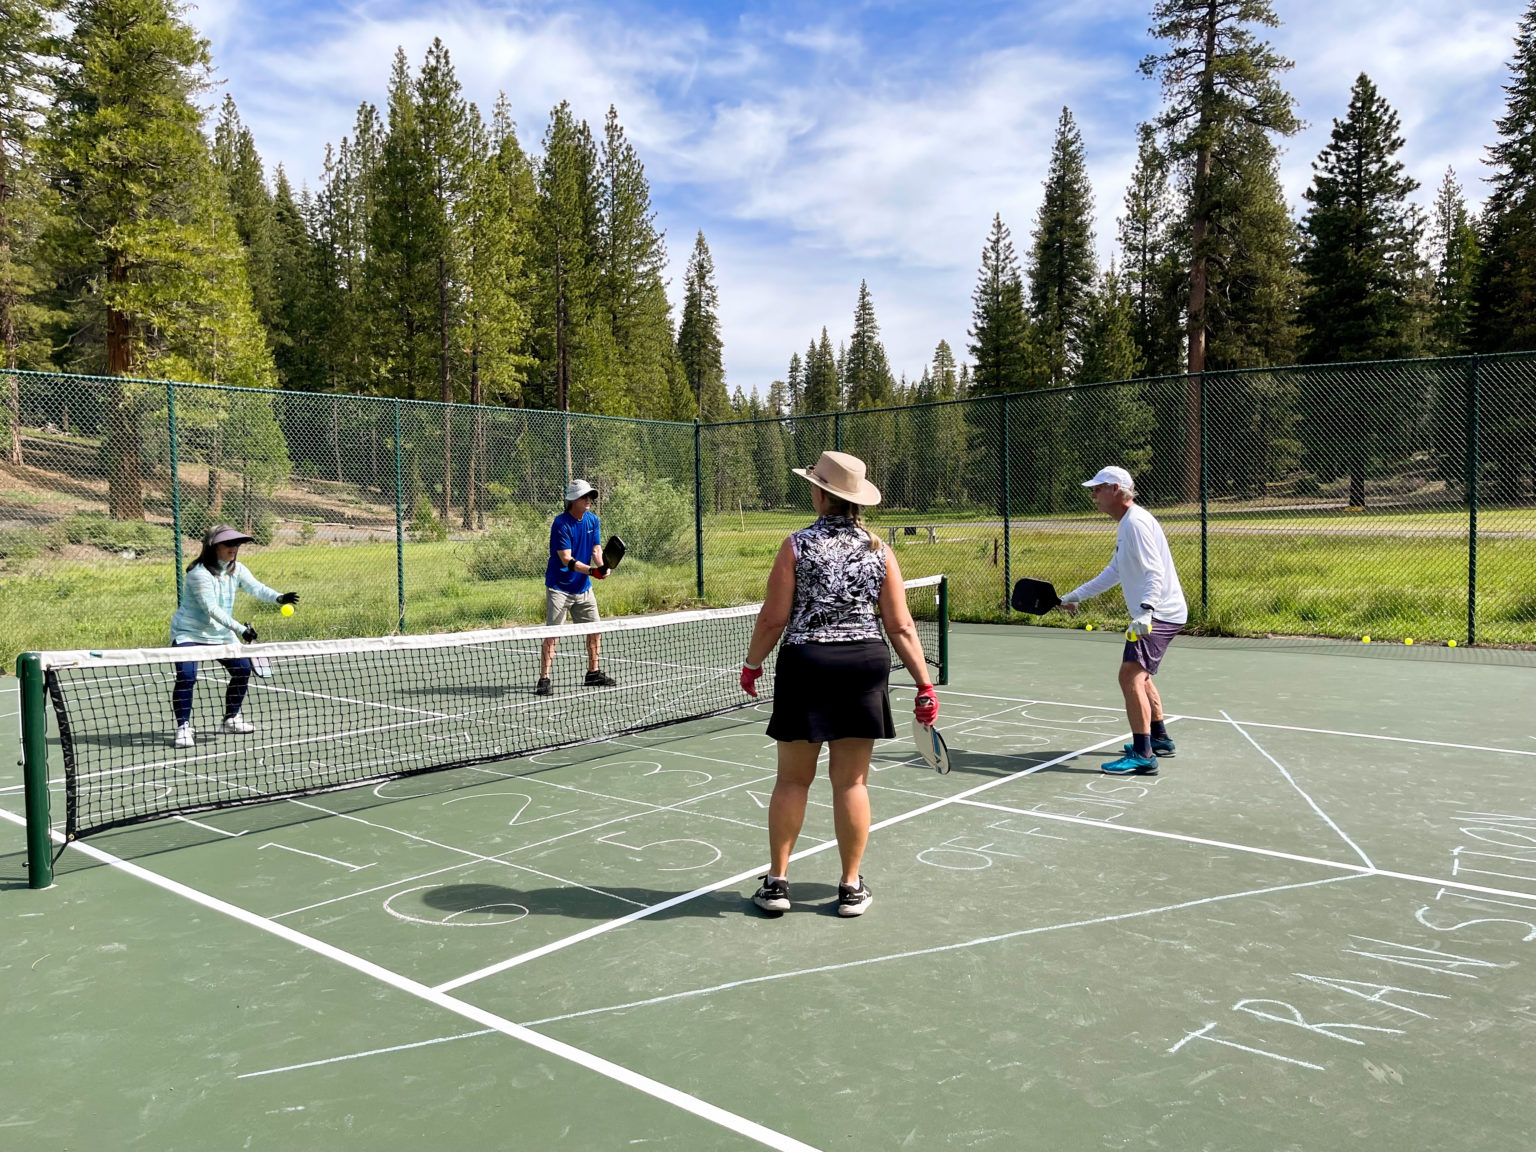 Pickleball players playing in the forest under a blue sky